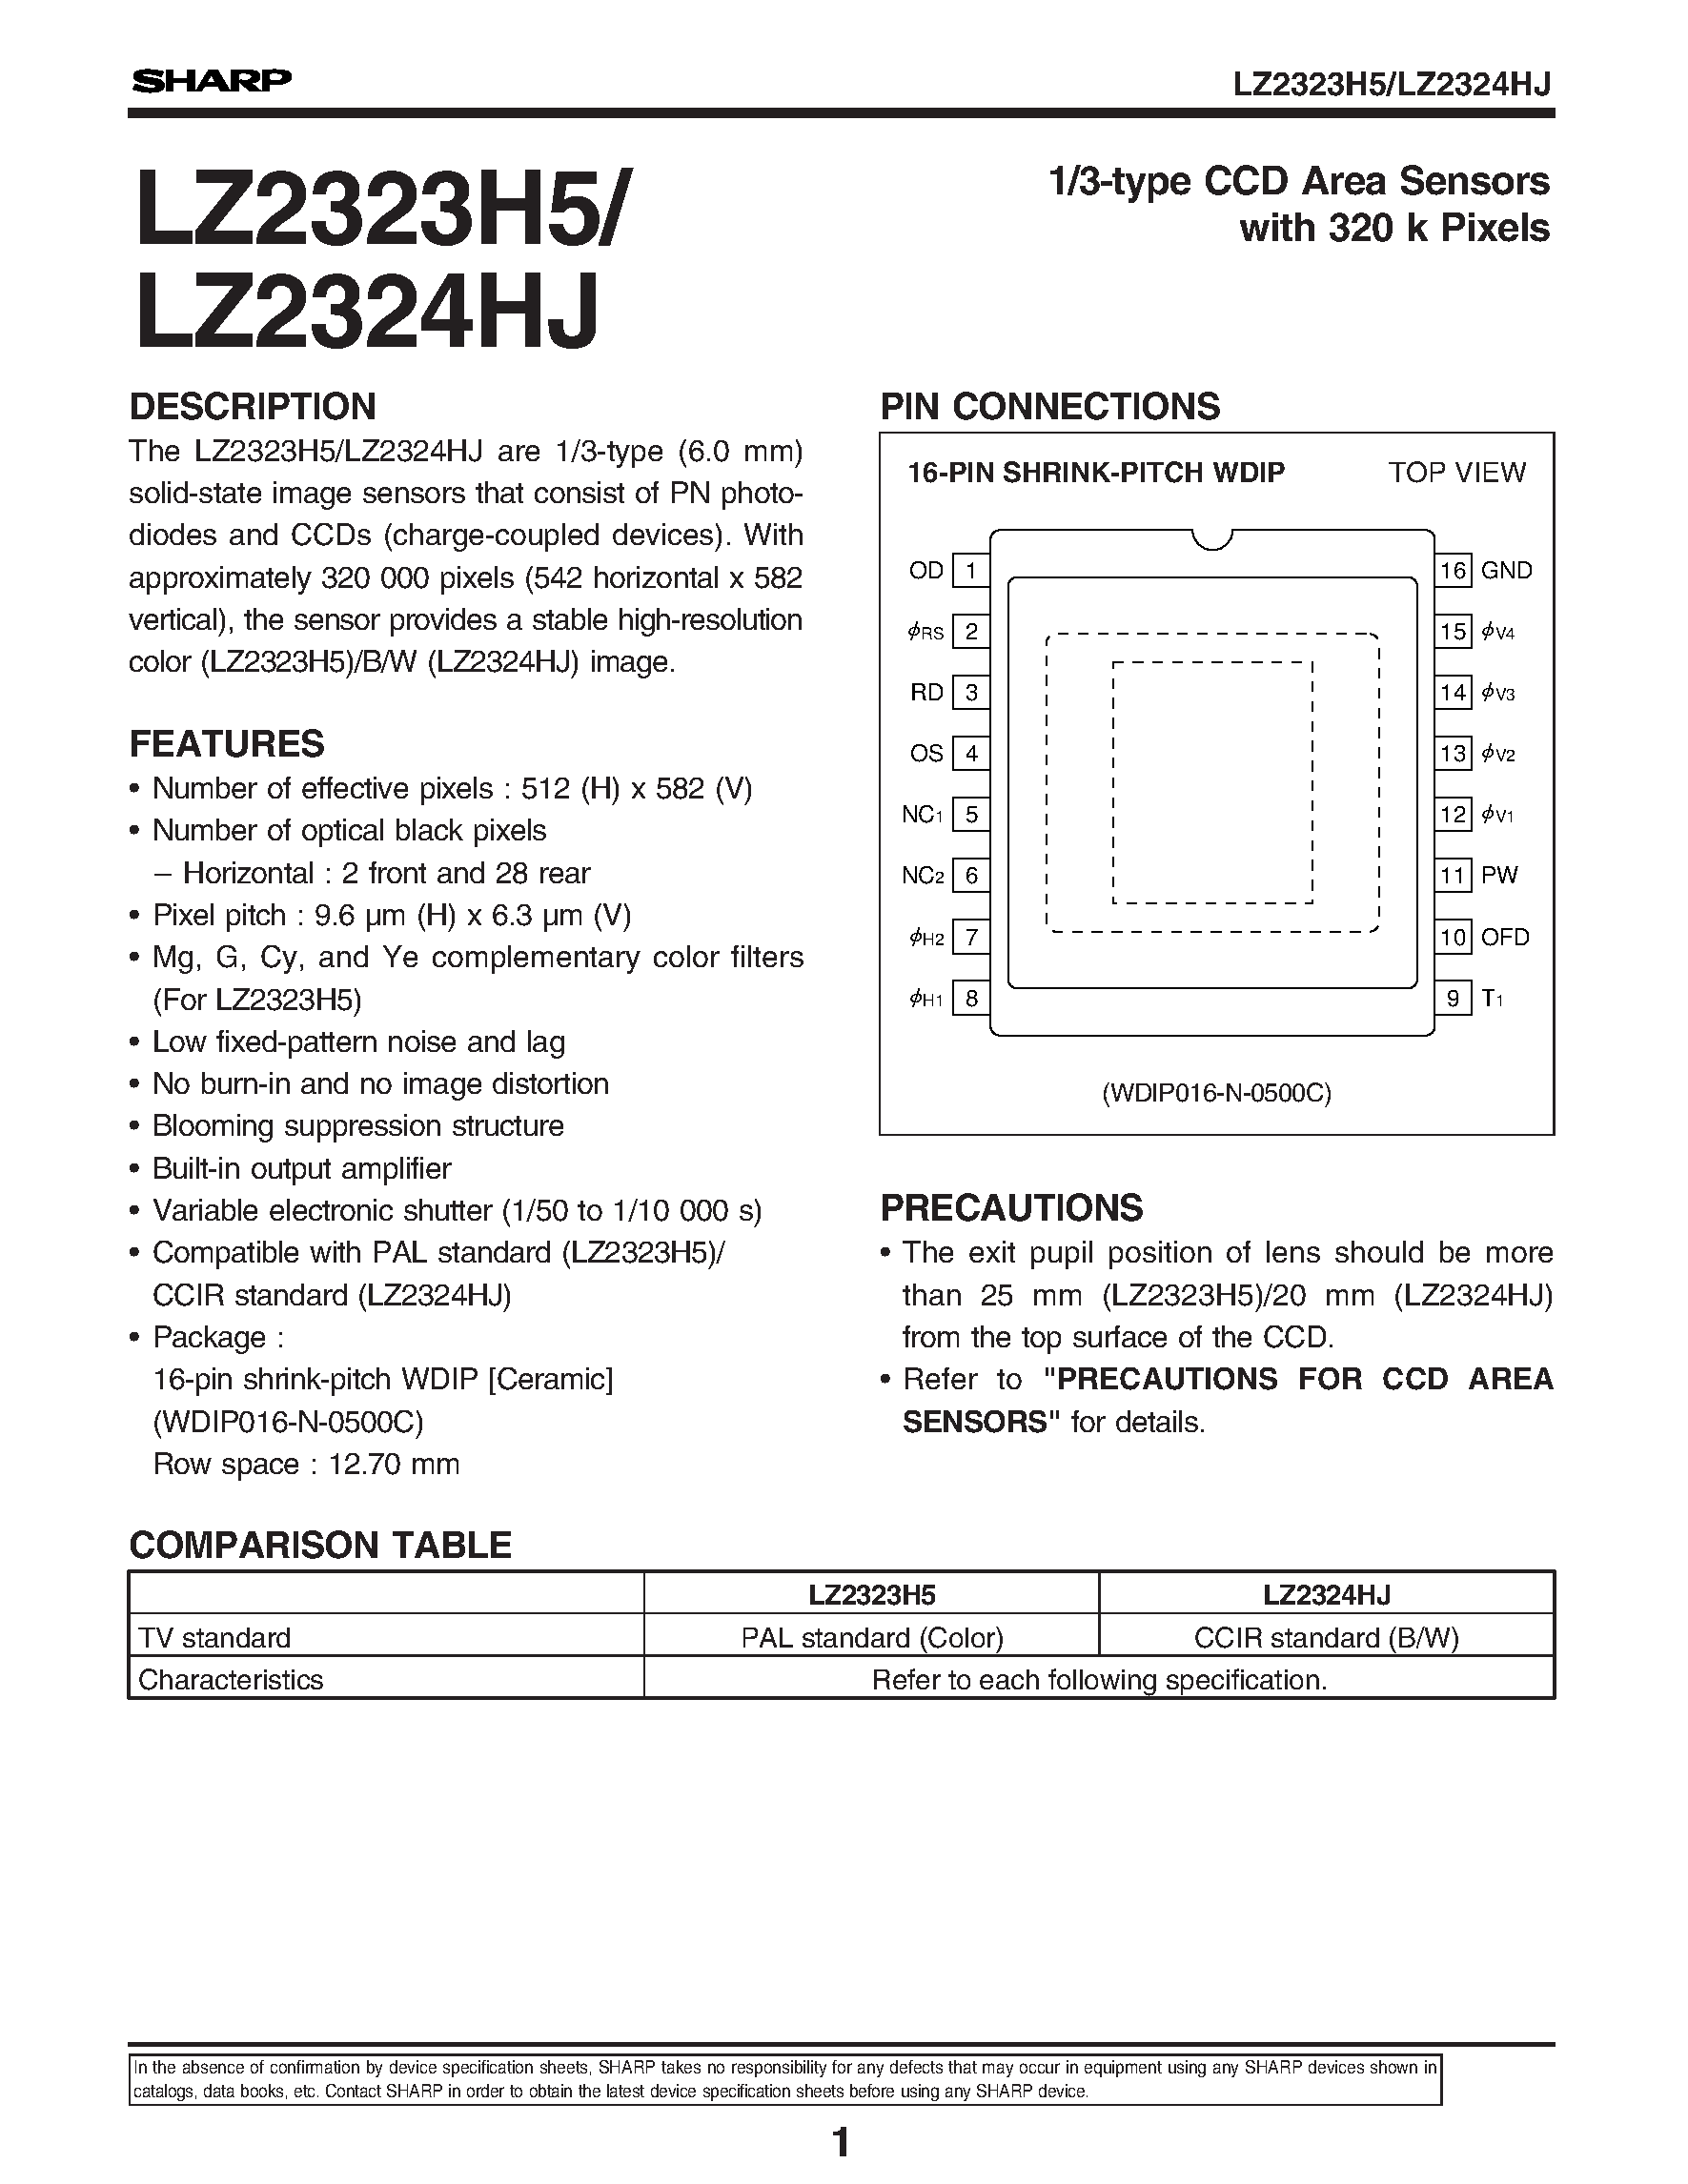 Datasheet LZ2323H5 - 1/3-type CCD Area Sensors with 320 k Pixels page 1